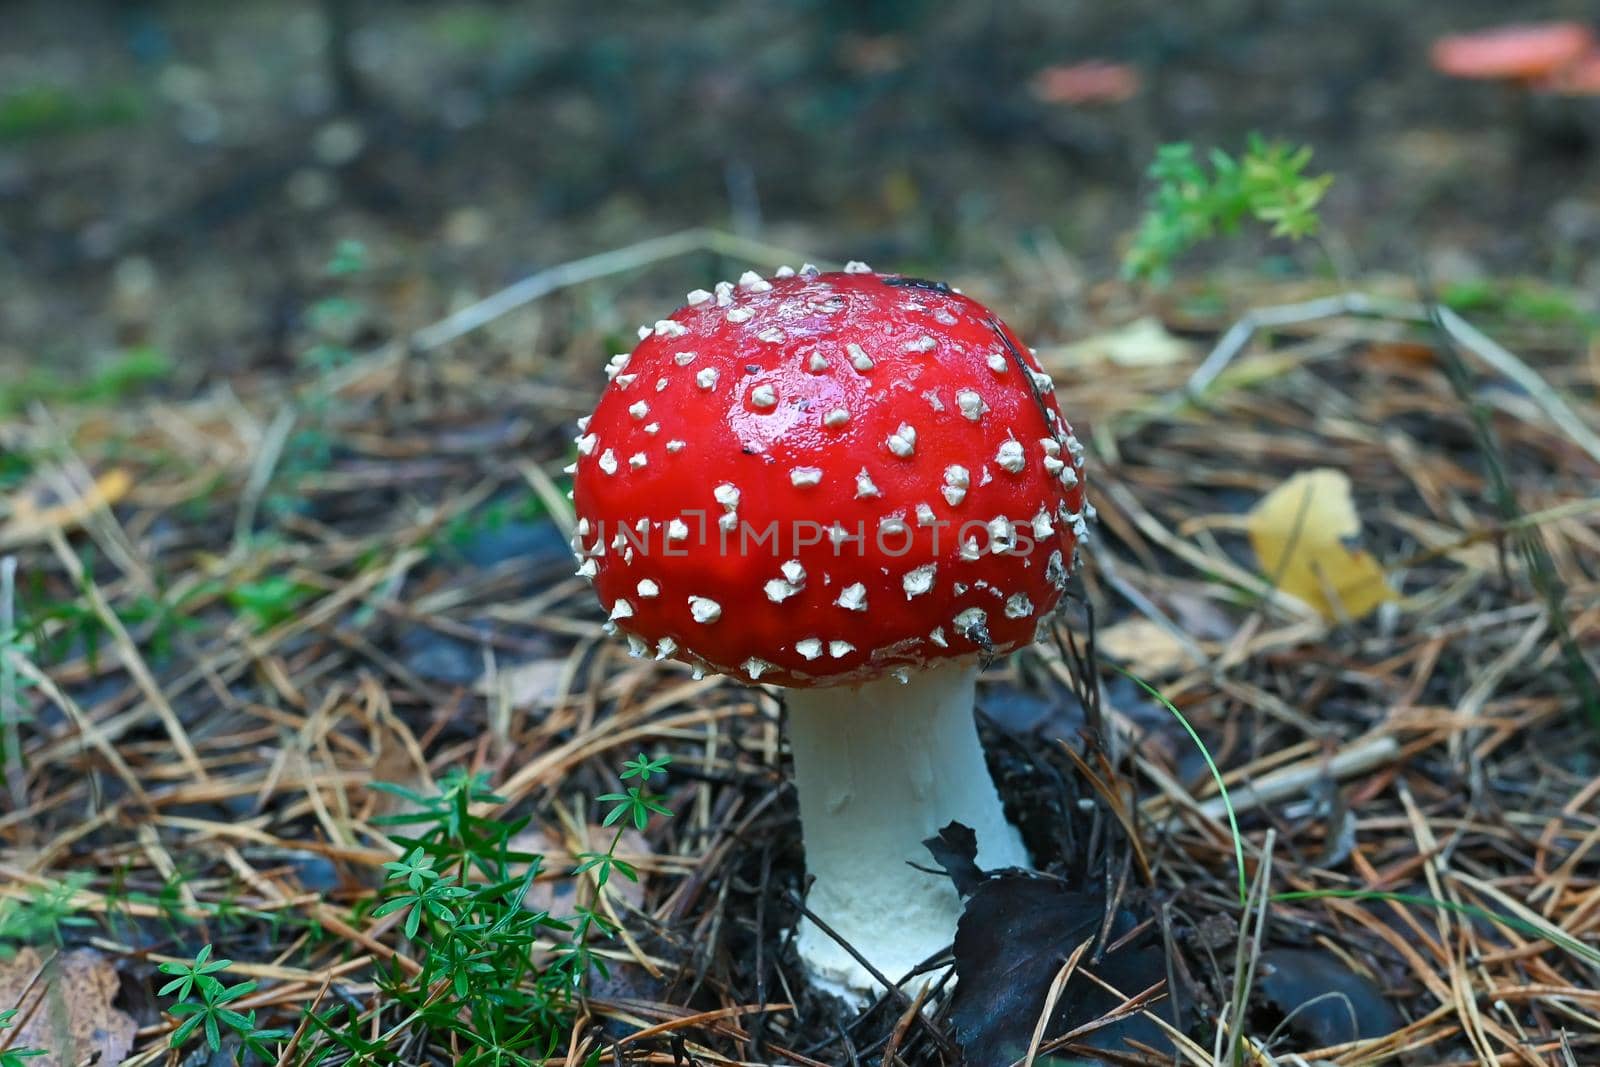 Amanita Muscaria, poisonous mushroom around the world, fly agaric close-up, selective focus.